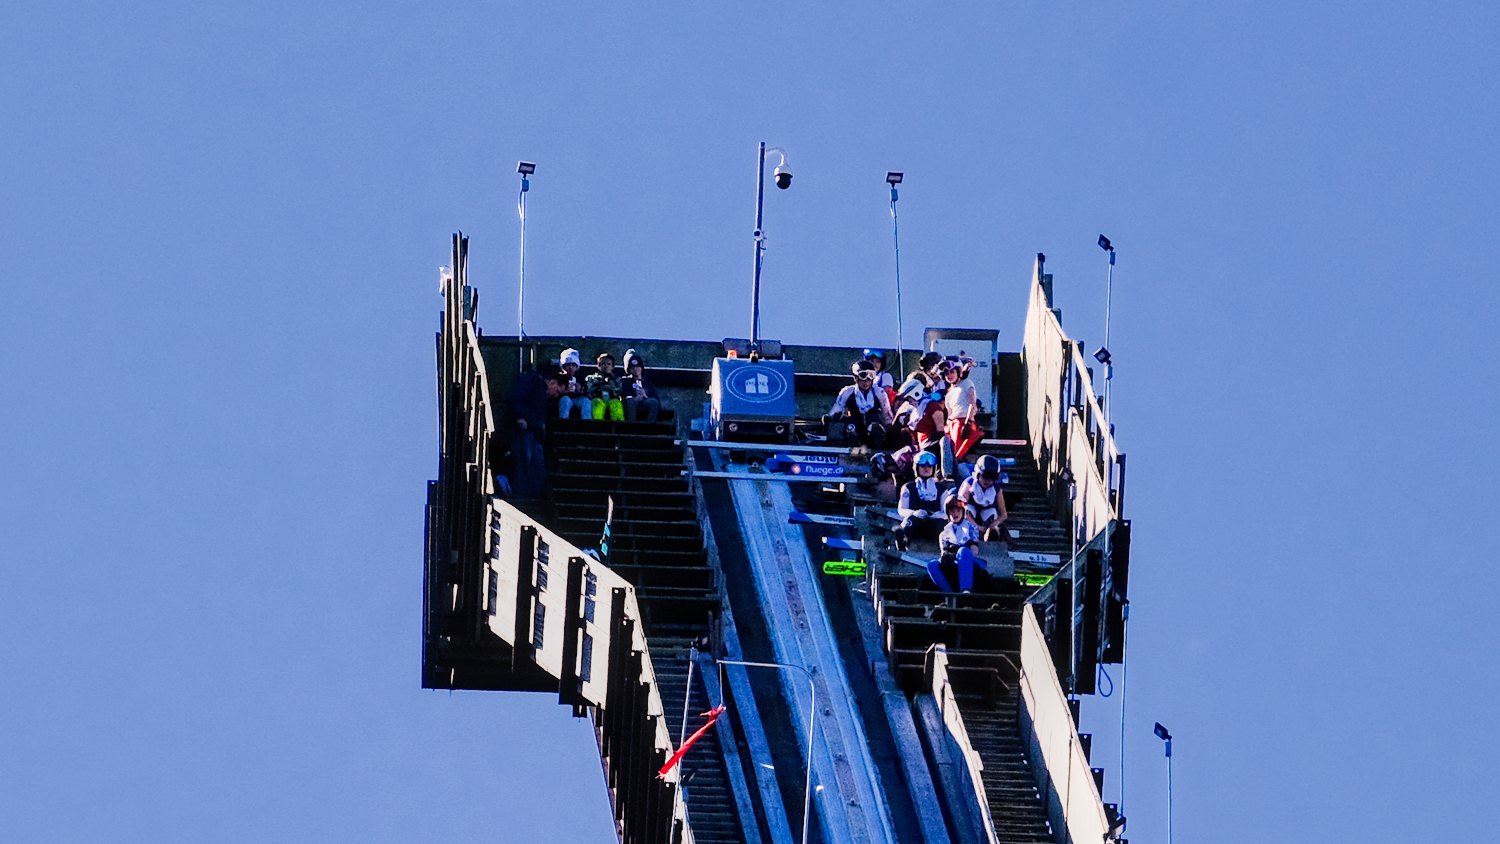 Ski jumpers seated at the top of the 70m tower at the 118th Annual Norge Ski Club Winter Tournament.